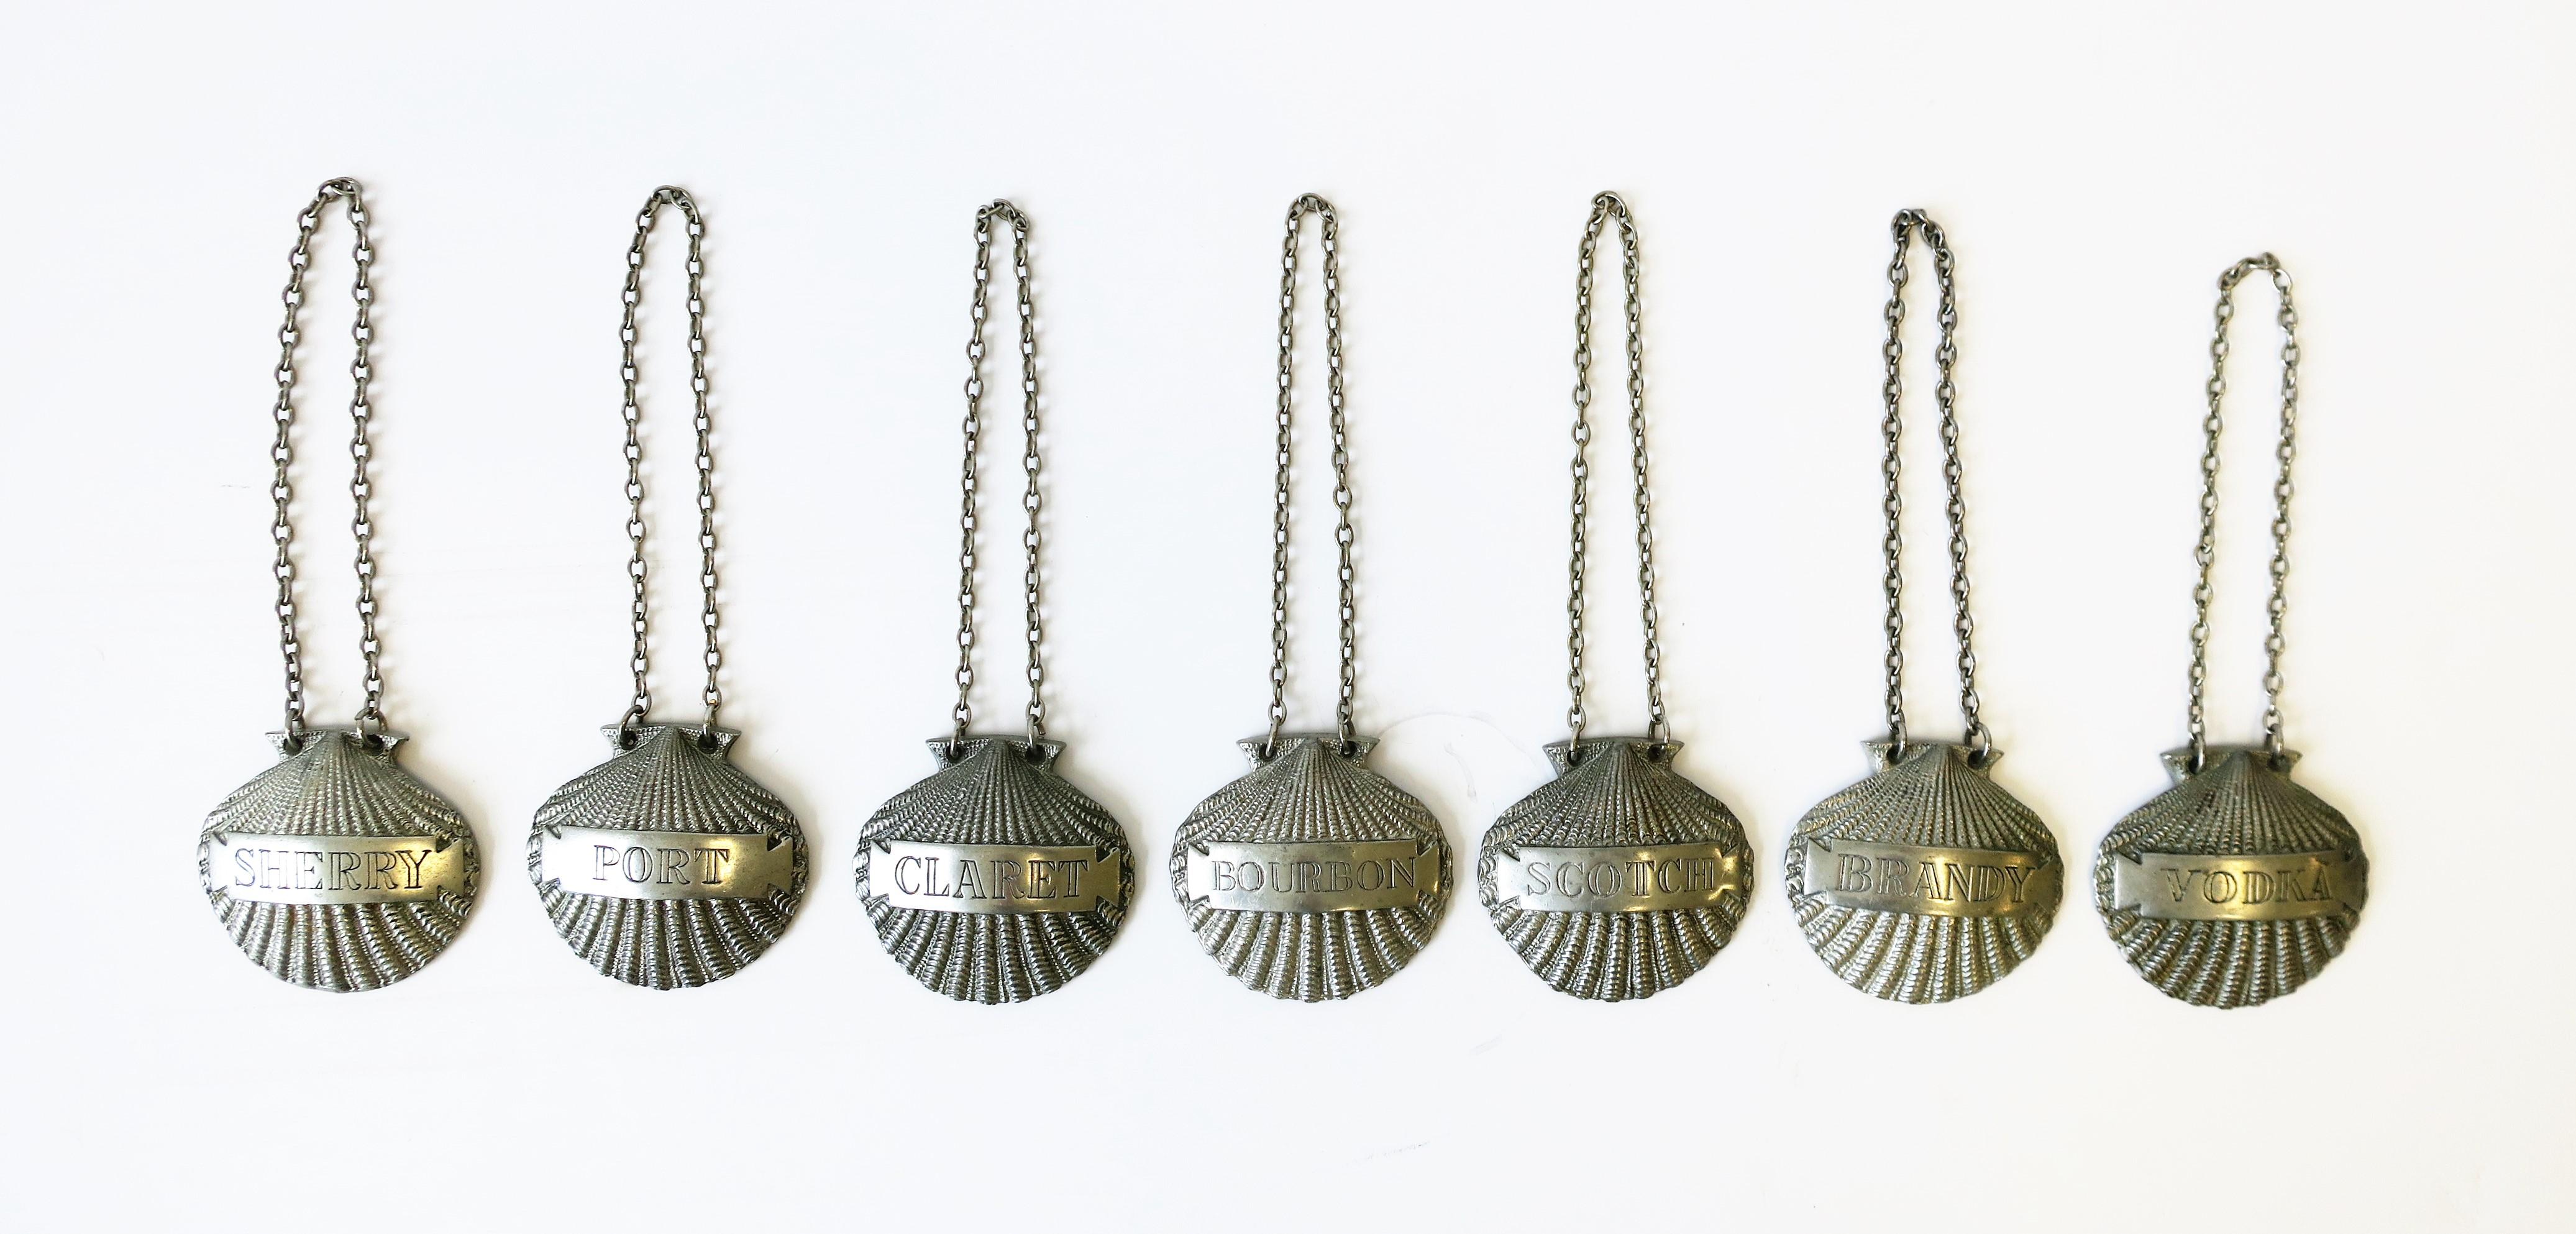 A set of seven (7) English scallop seashell liquor/spirits bottle or decanter bottle tags/labels, circa Mid-20th century, England. Tags are a nice weight with a beautiful detailed scallop seashell design. Tags include the following: Bourbon, Claret,